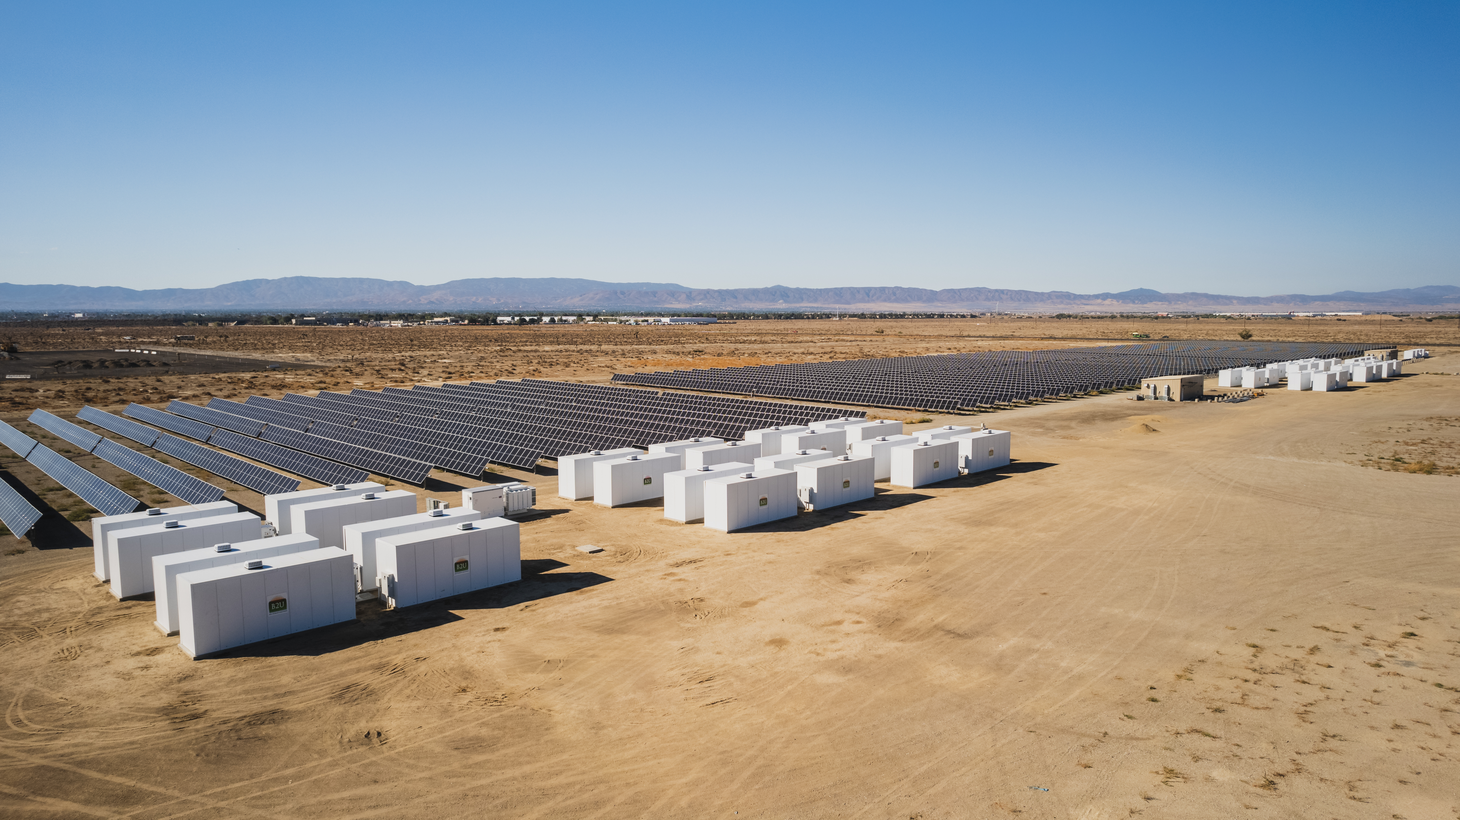 Old EV batteries stacked in trailers hold the solar energy the panels gather during the day.